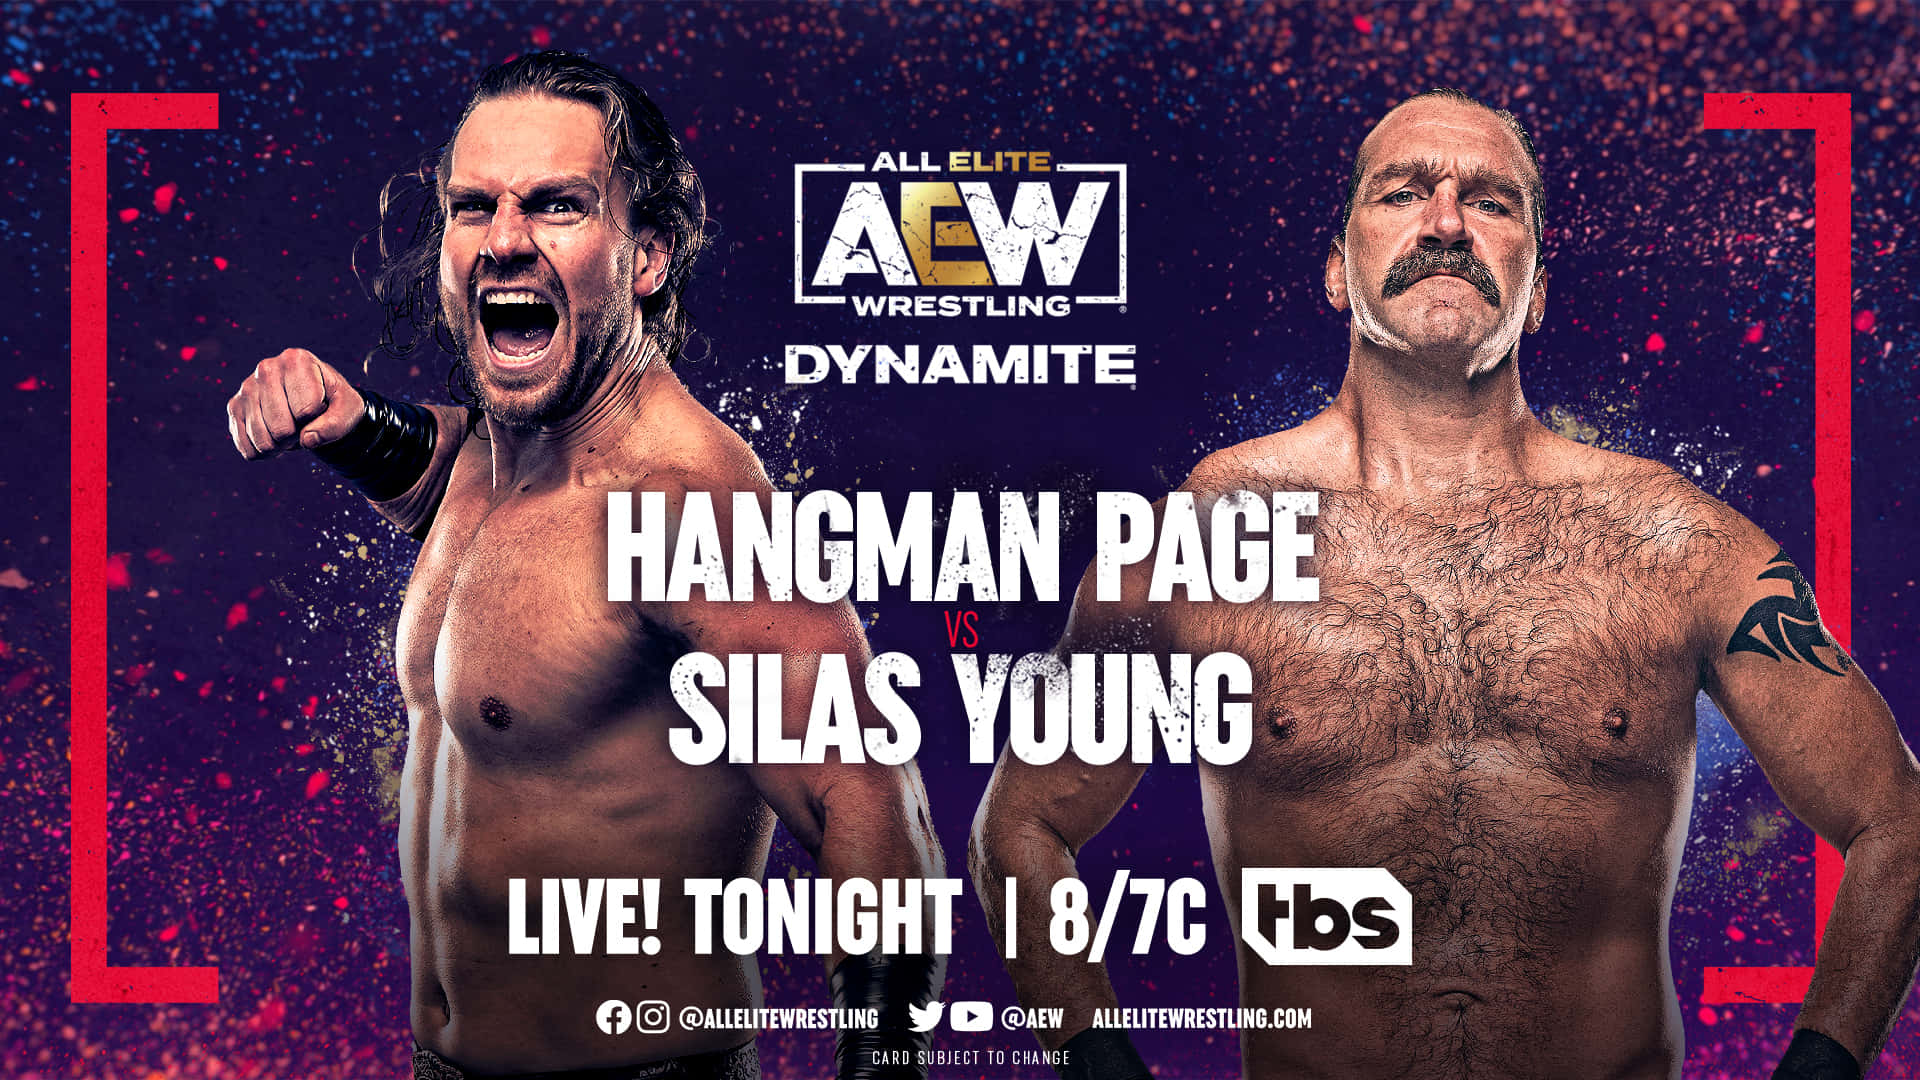 Adampage Mit Silas Young Wallpaper